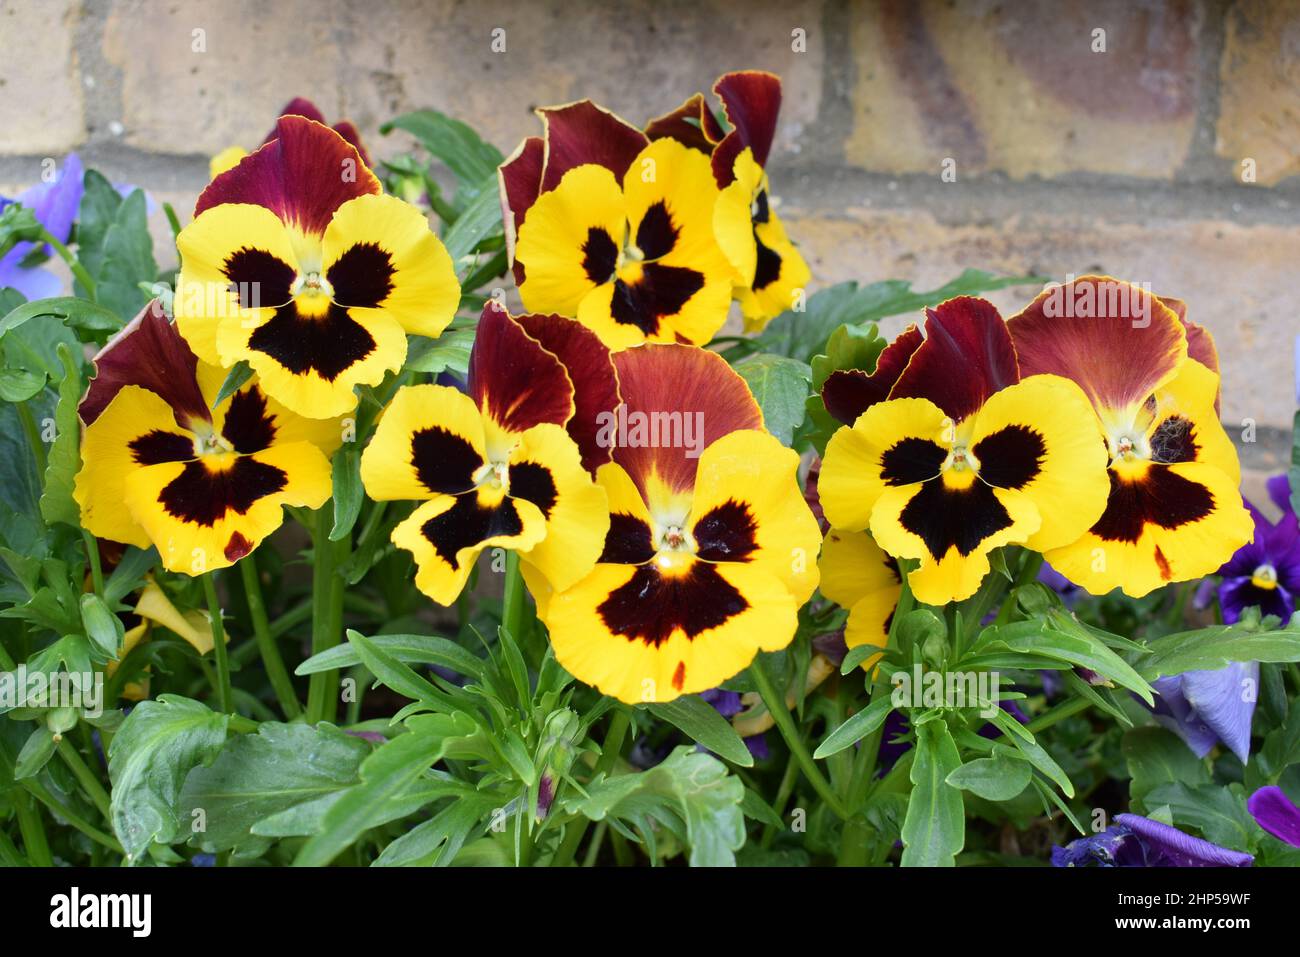 Pansy or Viola. Closeup of  several flowers with yellow and crimson petals with brown toward centre. Stock Photo